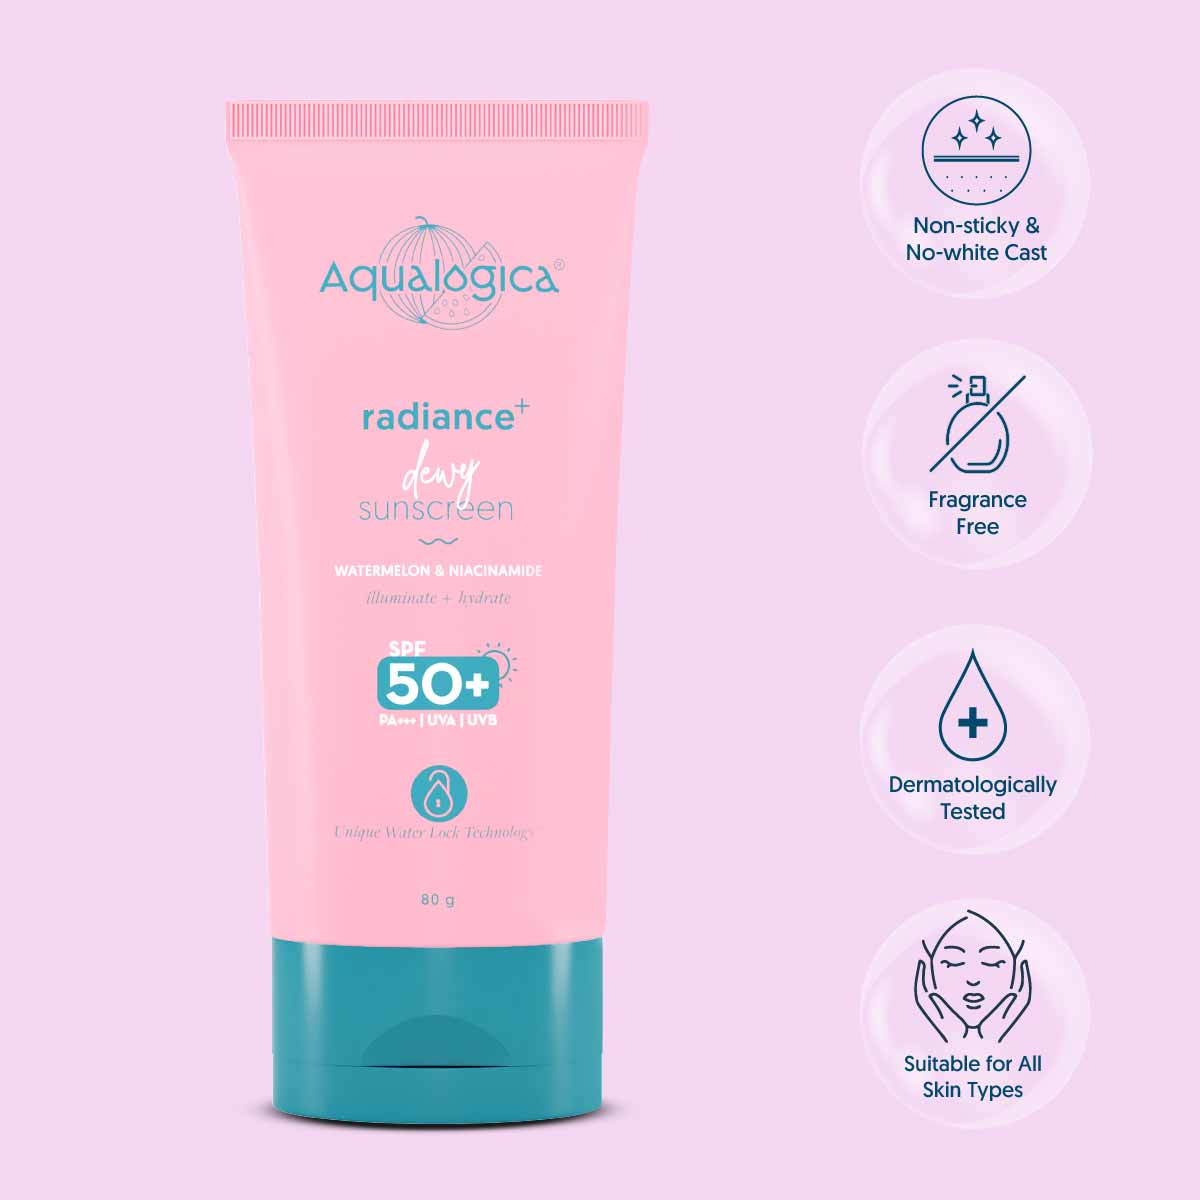 Radiance+ Dewy Sunscreen, 80g(Pack Of 2)